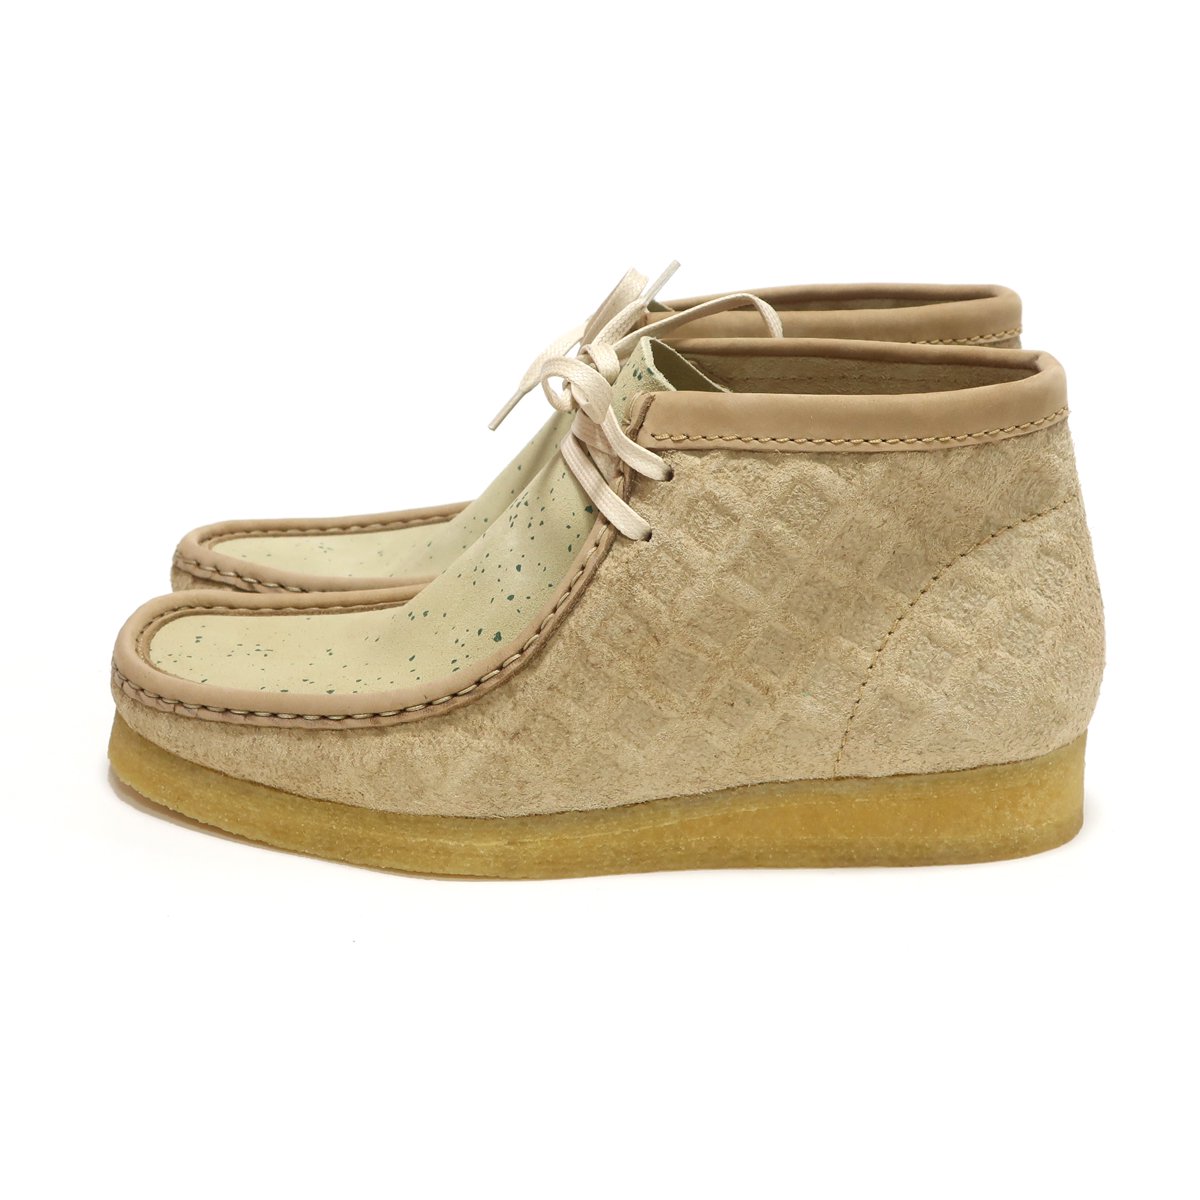 Clarks  Wallabee Boot NATURAL